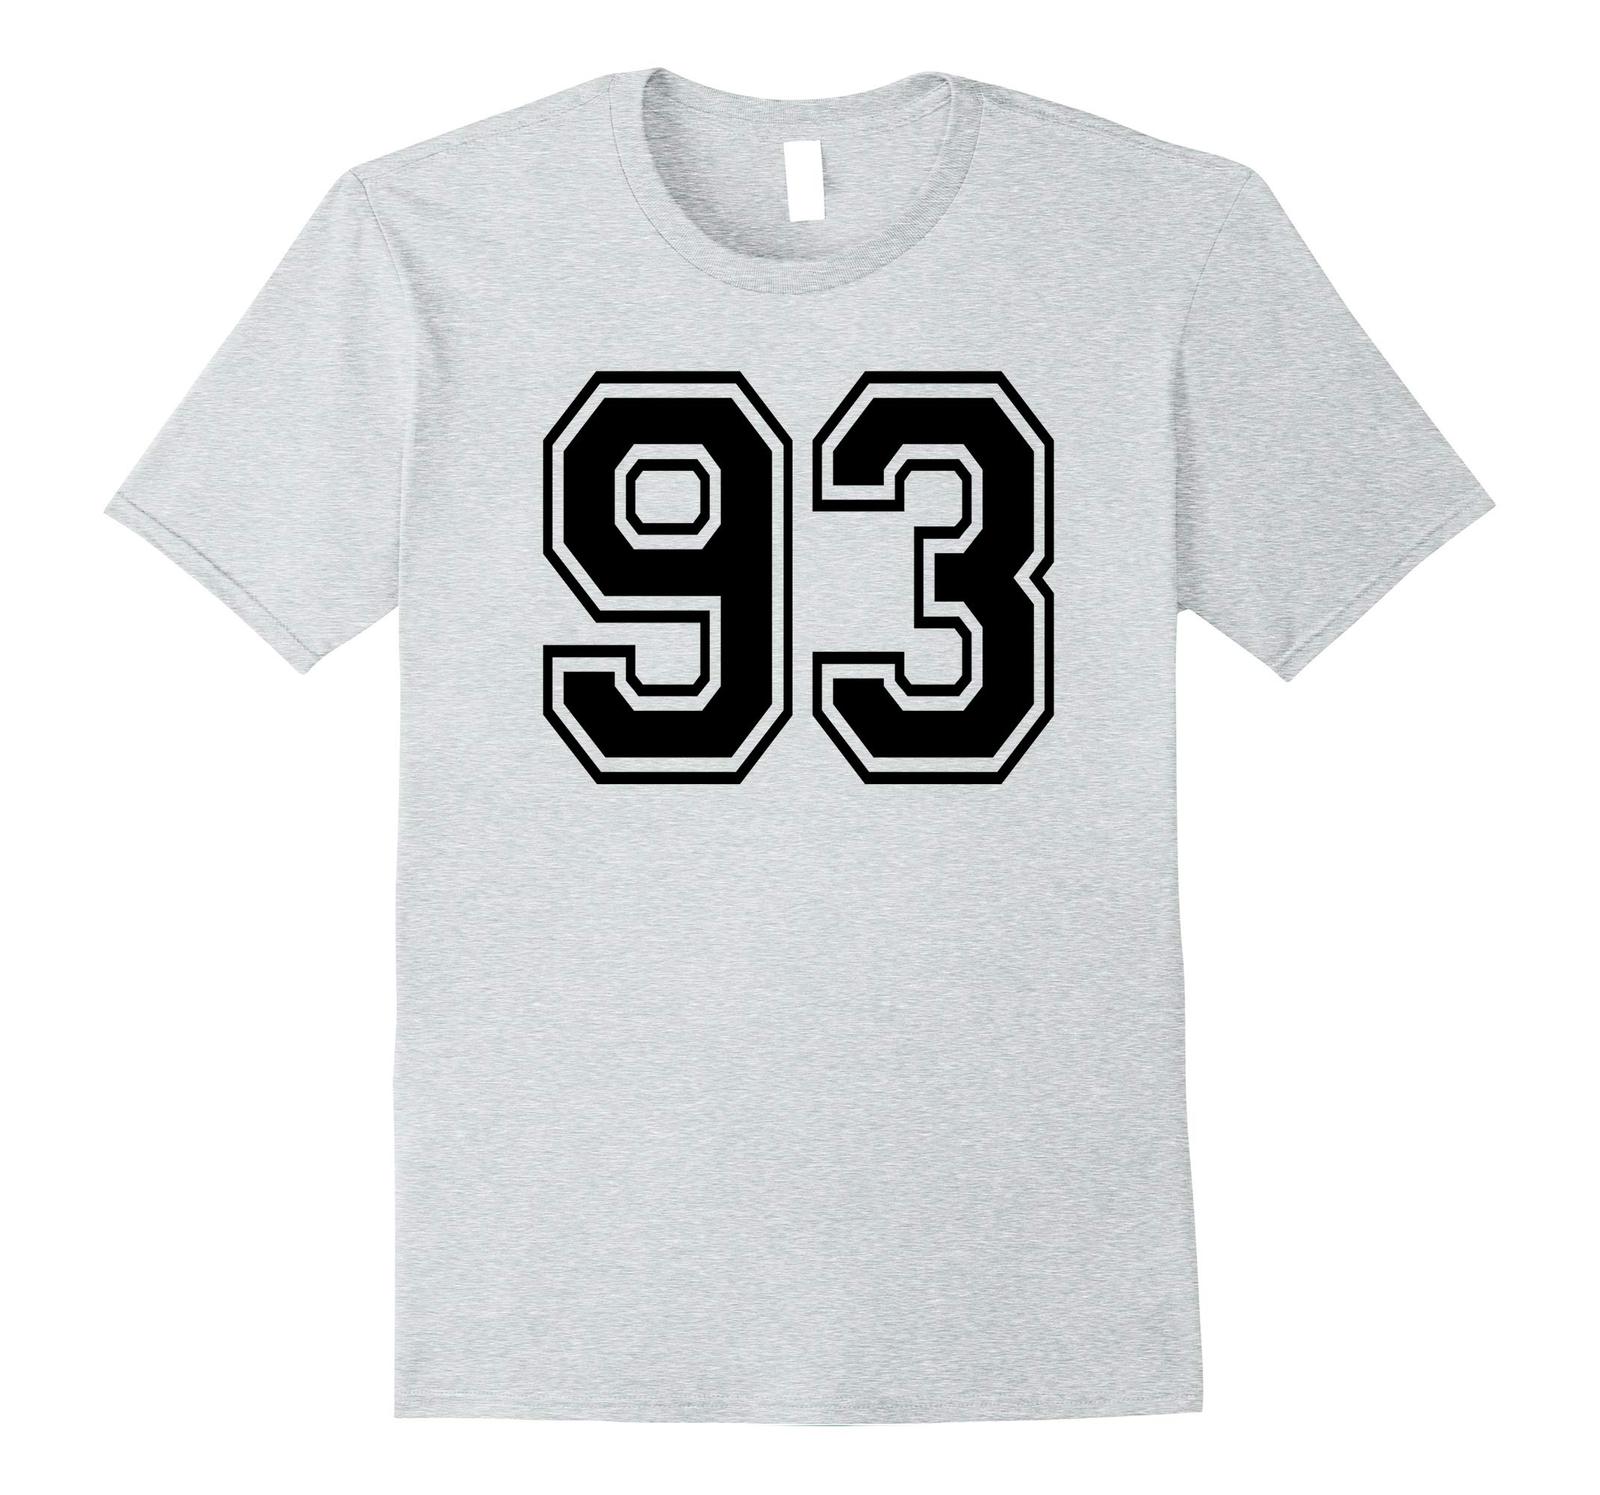 New Tee - Number #93 College Sports Team T-Tees front & back BLACK Men ...